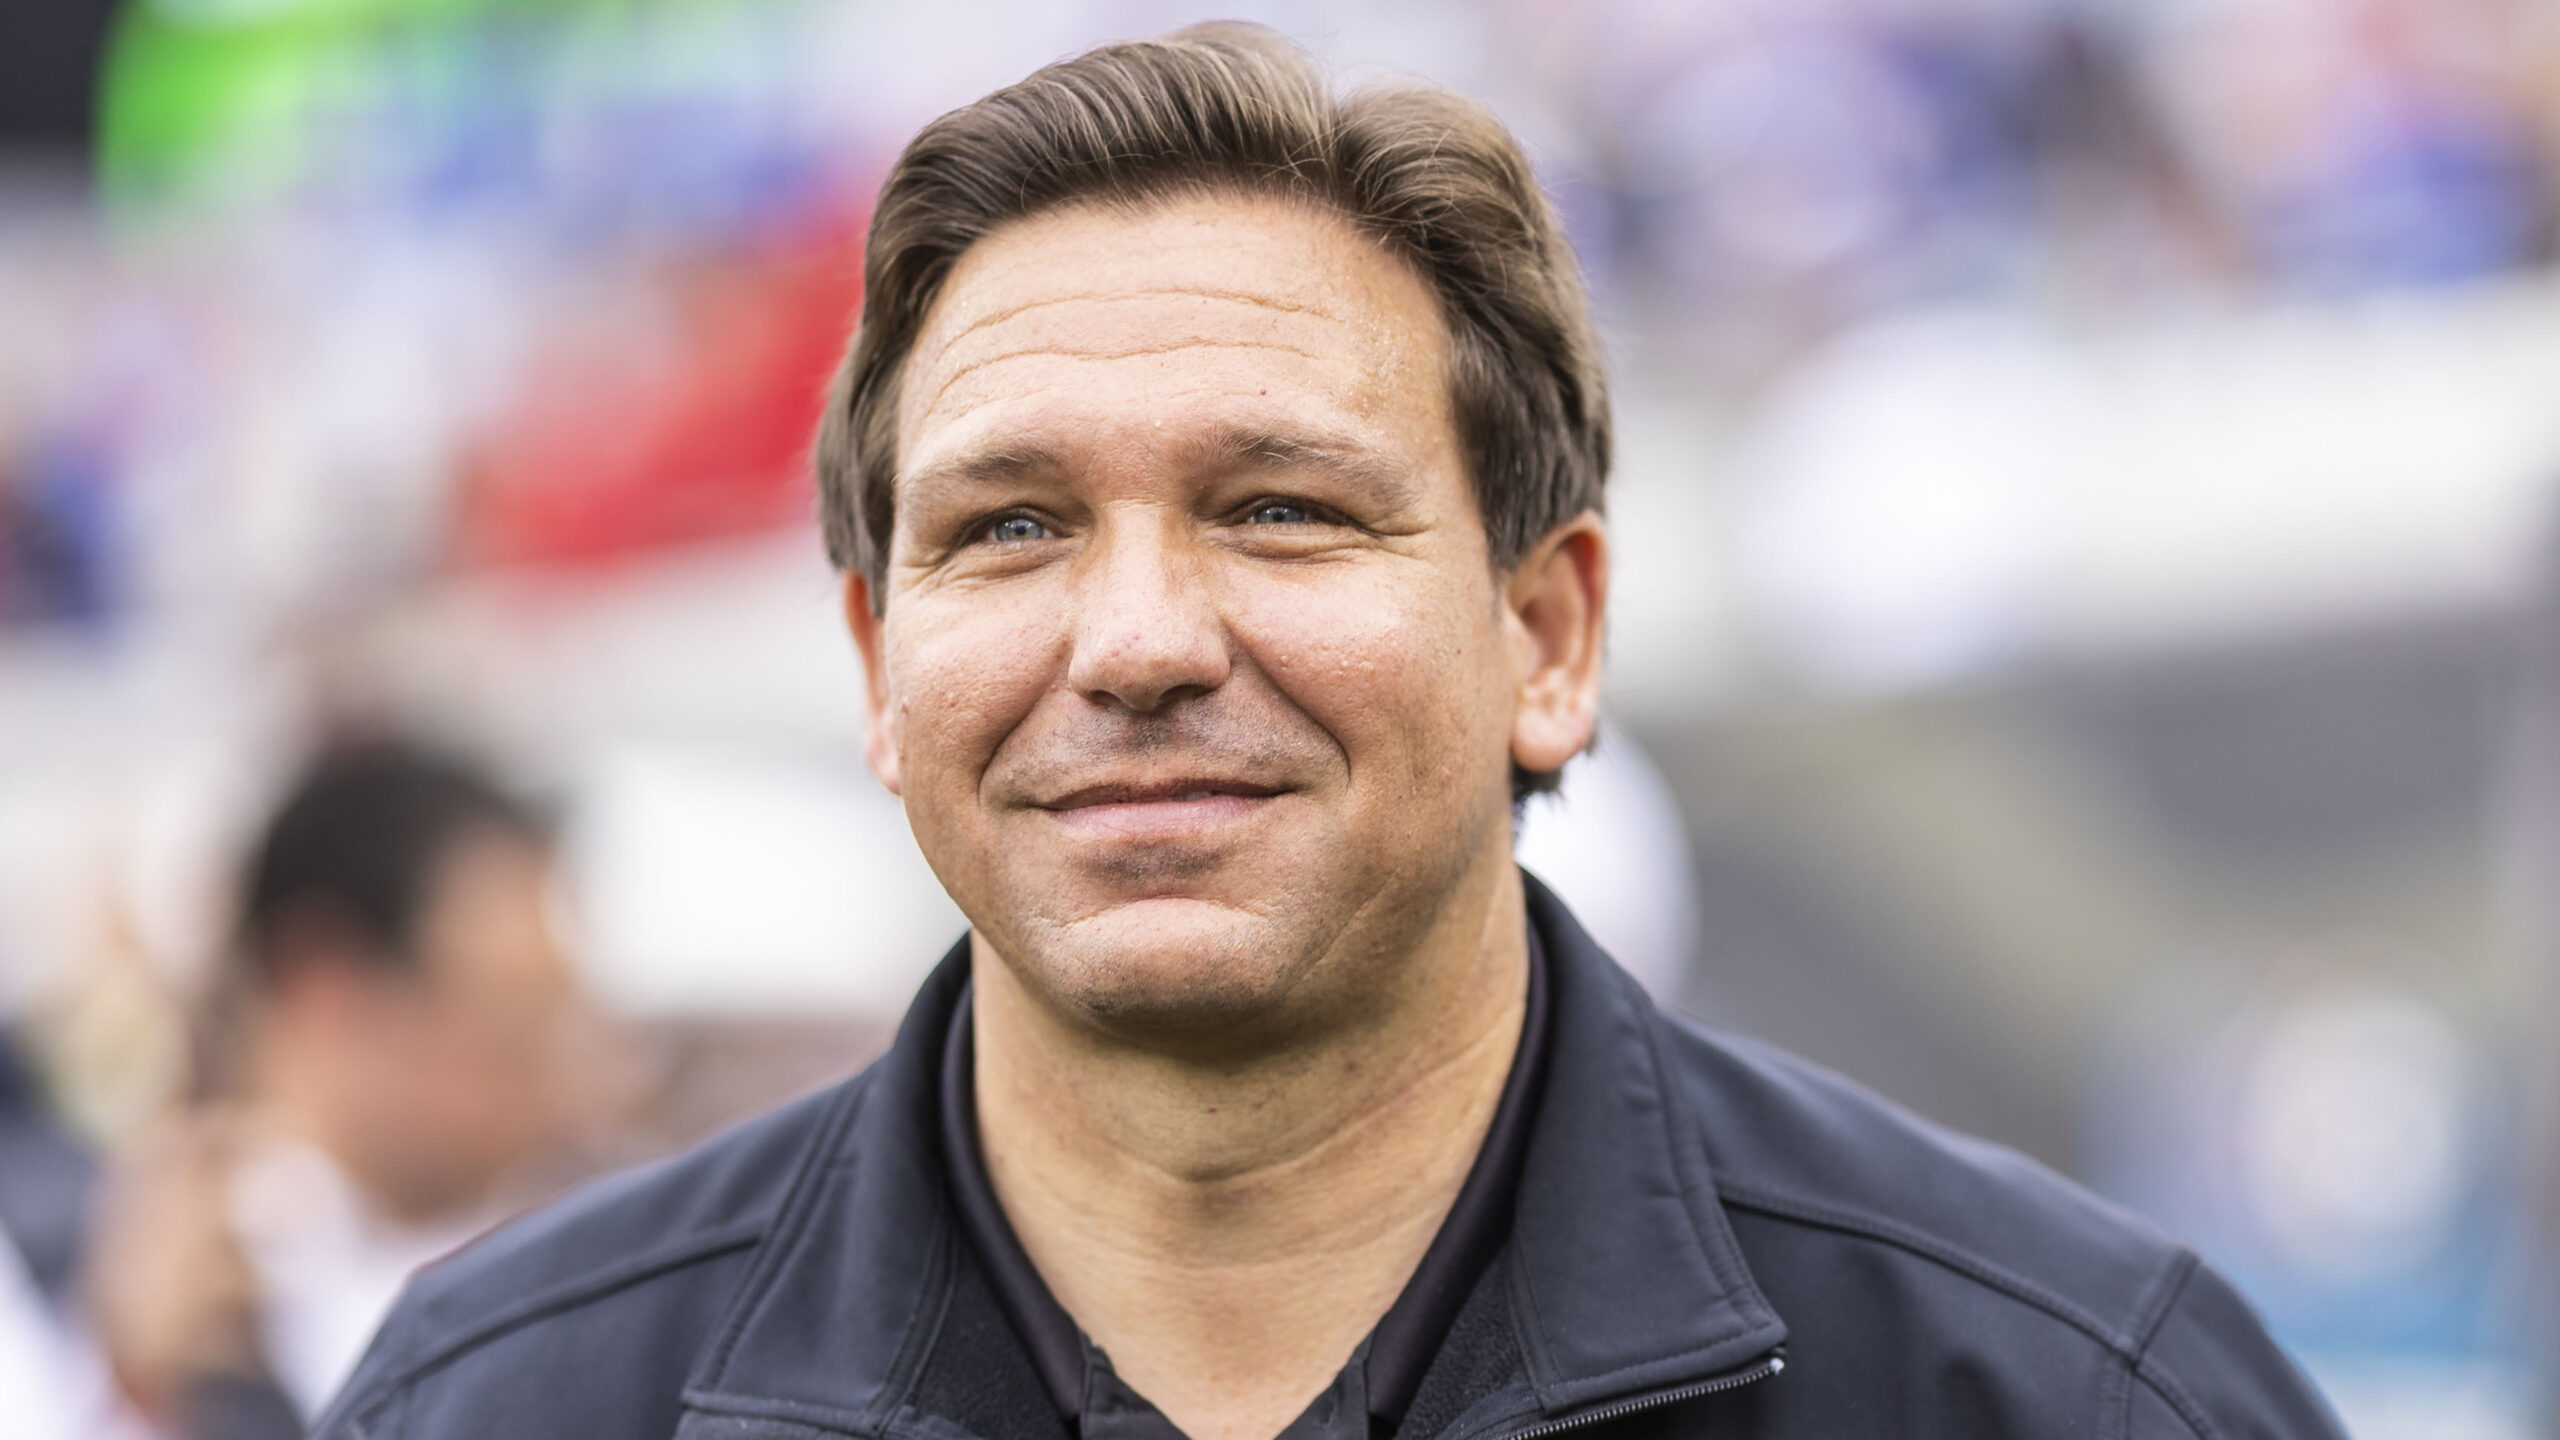 DeSantis Responds To Opponents Who Claim He Doesn’t Have Enough ‘Personality’ To Be President